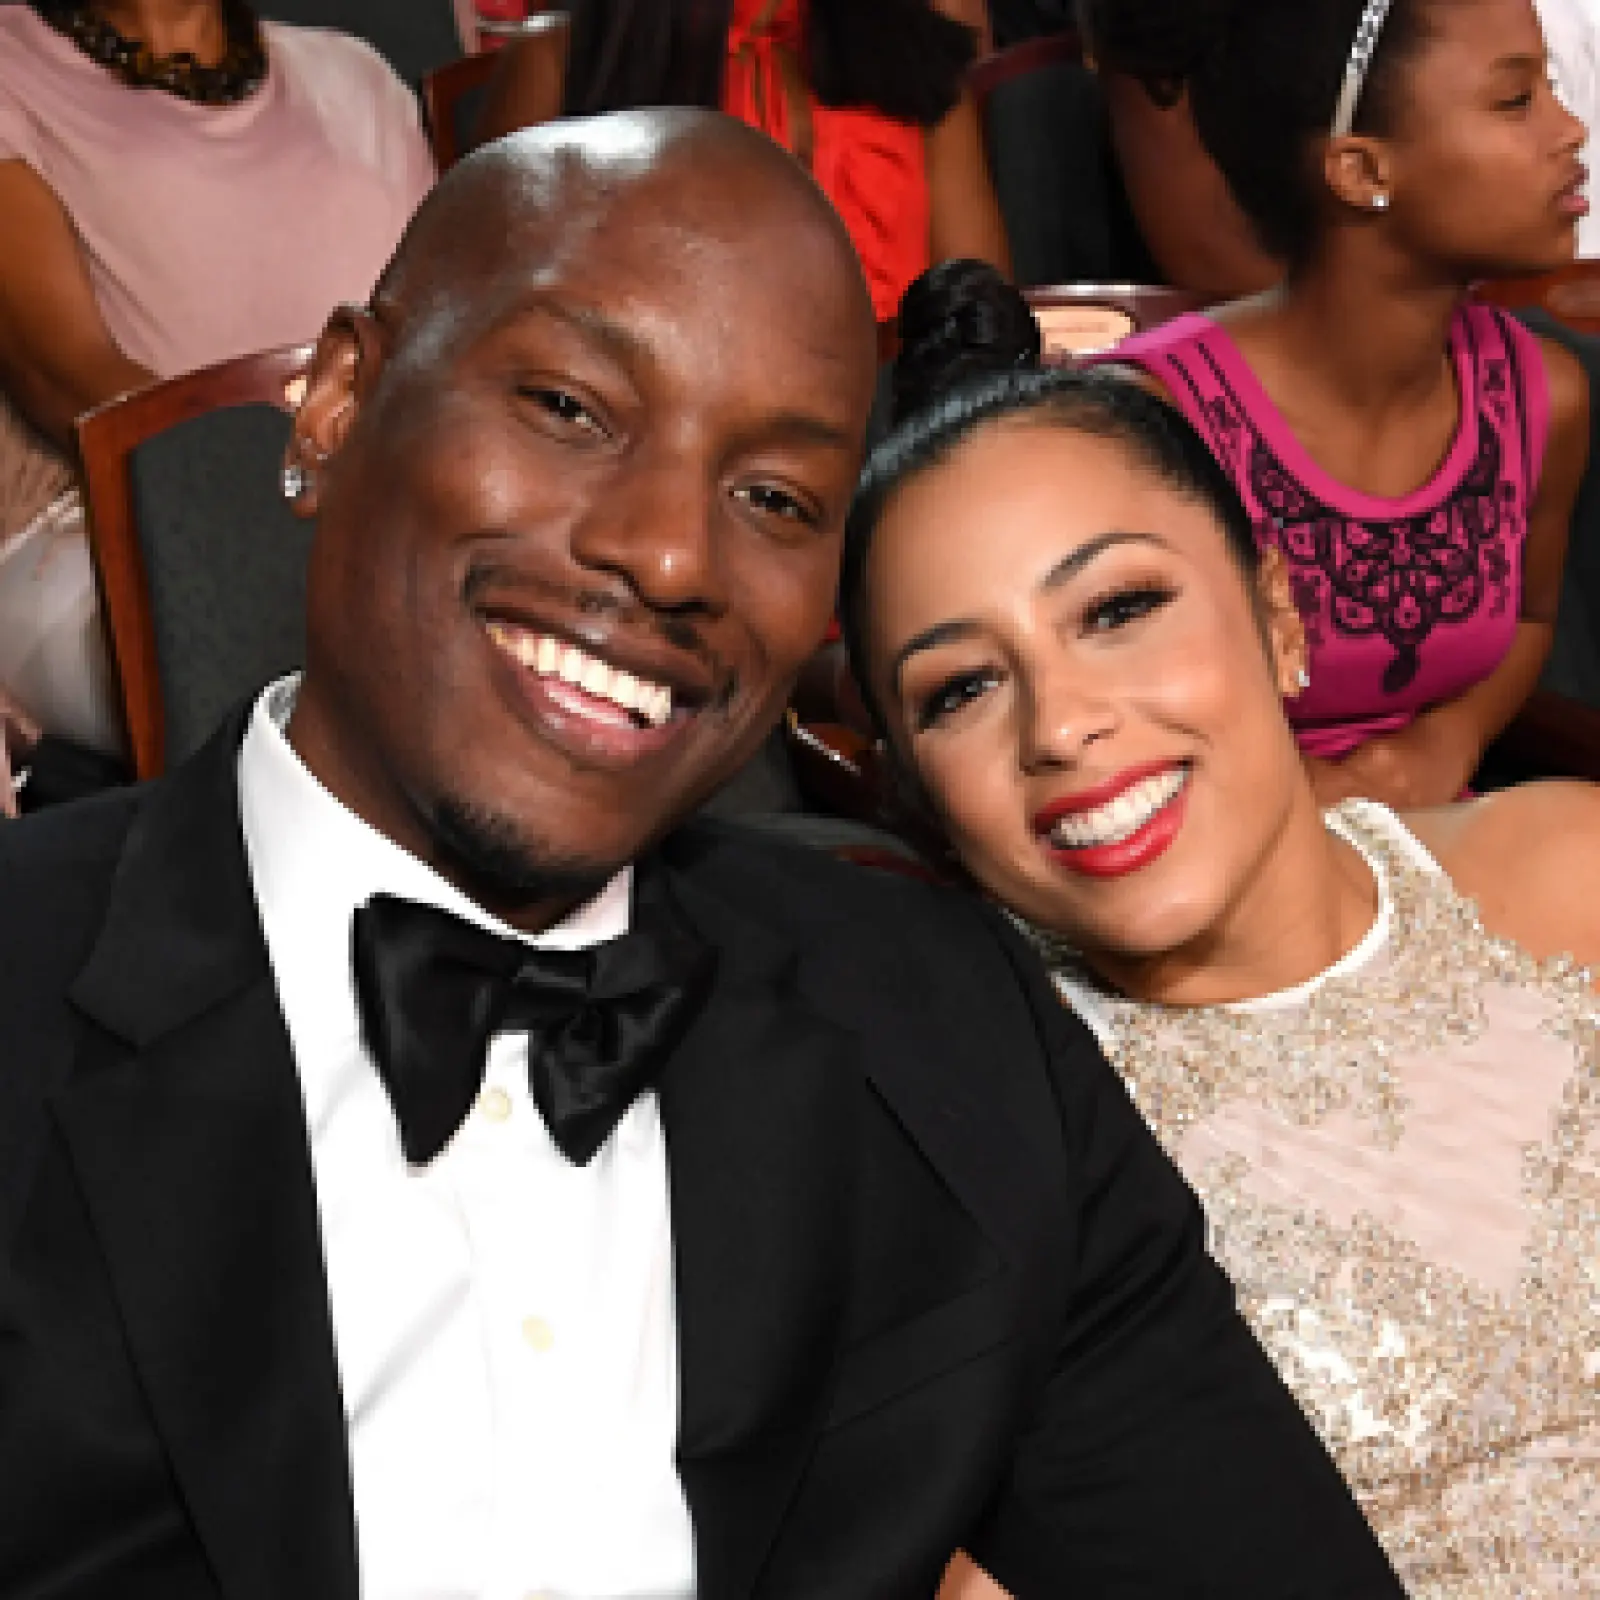 Who Is Samantha Lee Gibson? Age, Bio, Career And More of Tyrese’s Ex-Wife